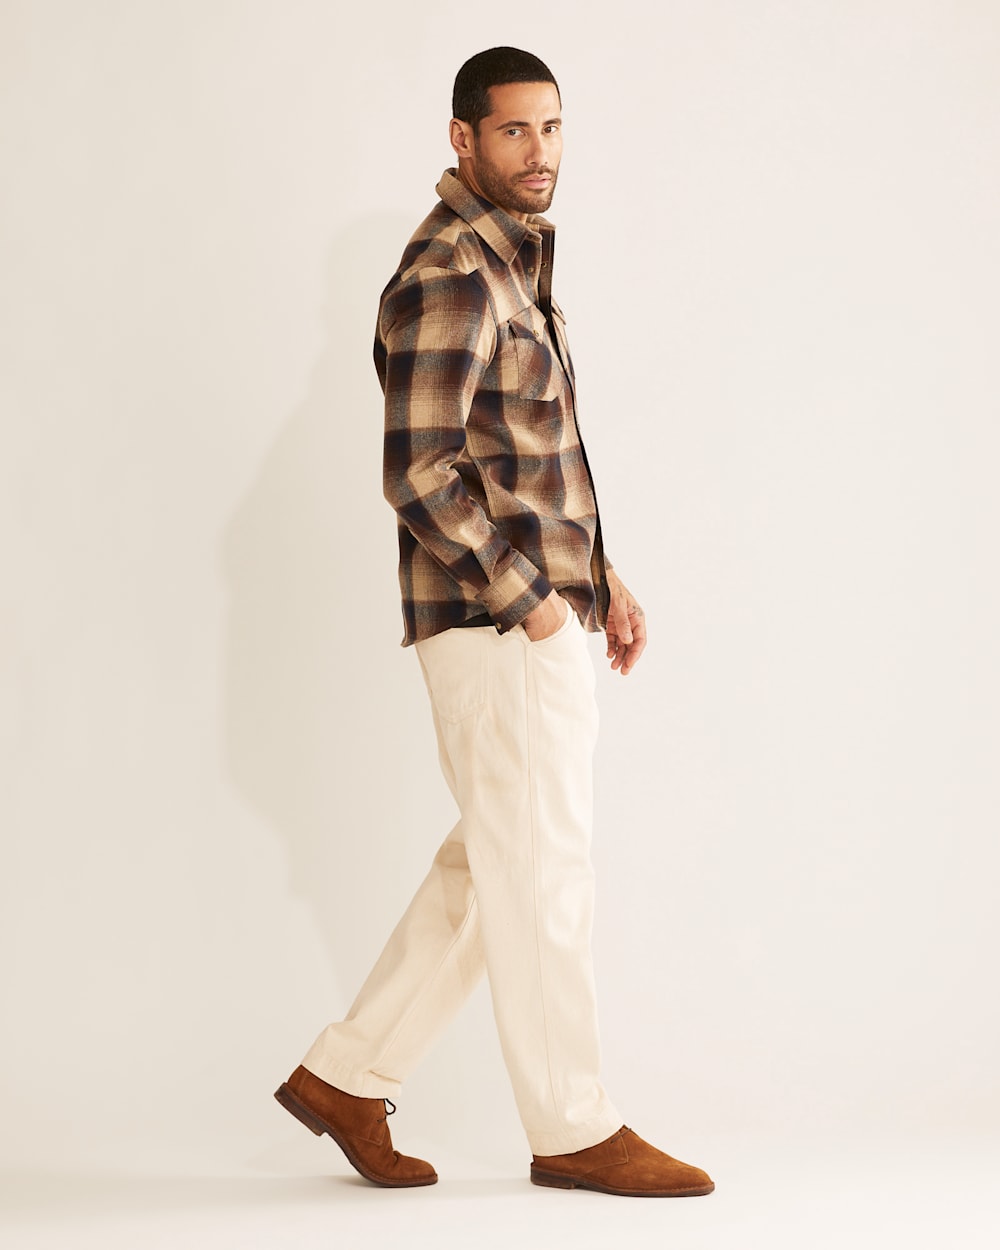 ALTERNATE VIEW OF MEN'S PLAID SNAP-FRONT WESTERN CANYON SHIRT IN BROWN/NAVY OMBRE image number 2